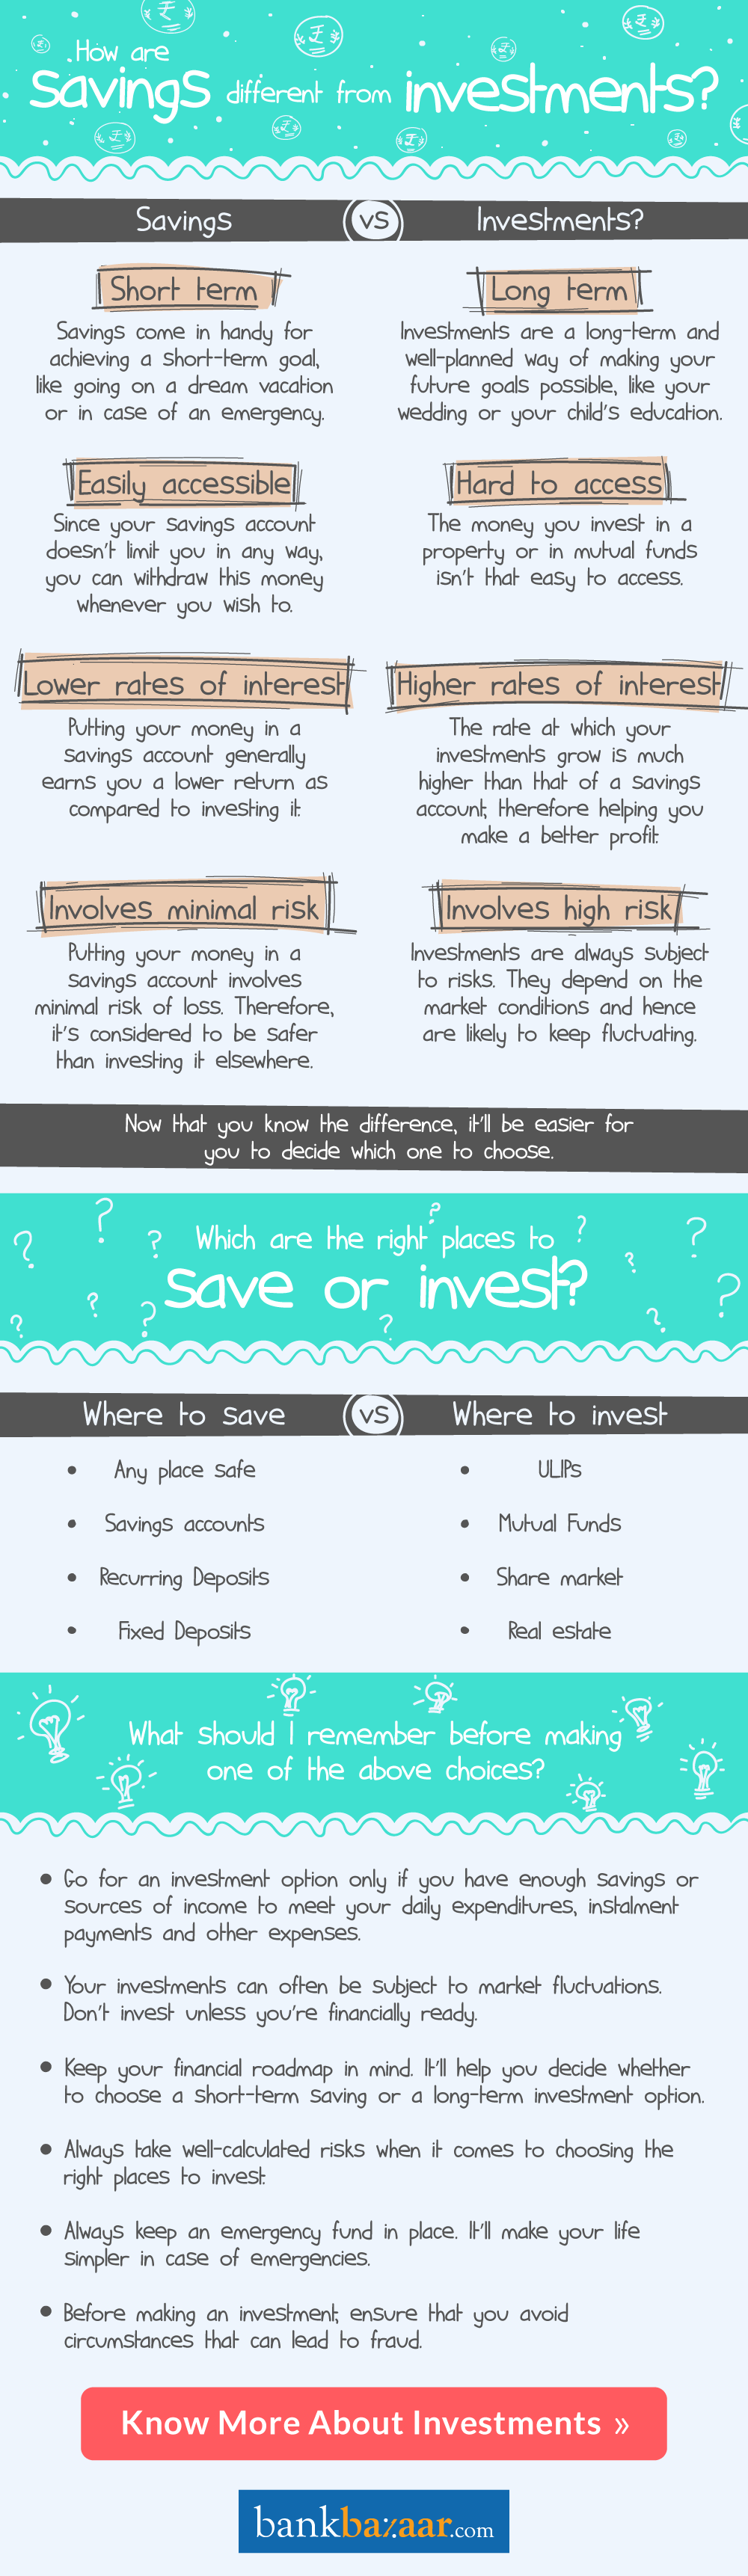 Savings vs Investments: Do You Know The Difference?